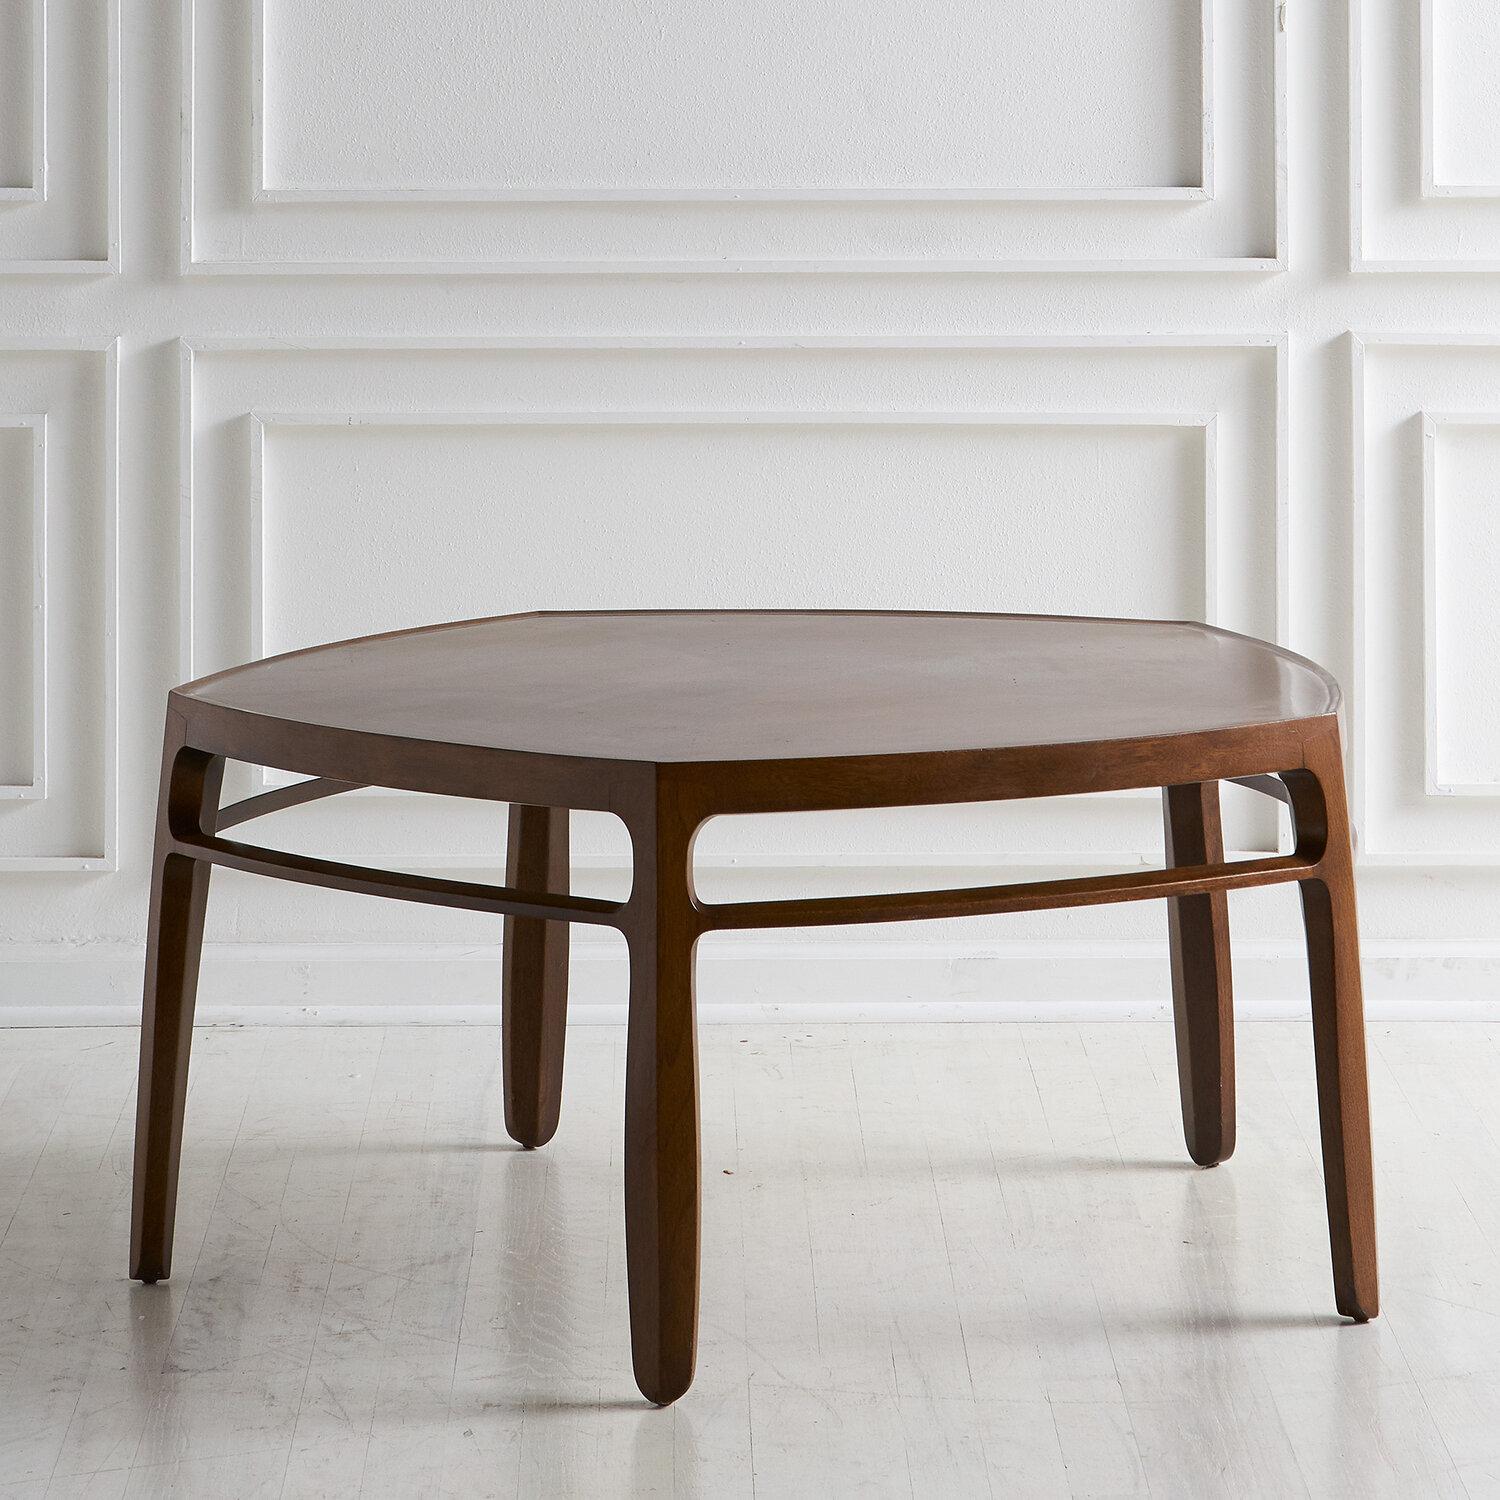 Five sided coffee table from the Janus collection by Edward Wormley for Dunbar.